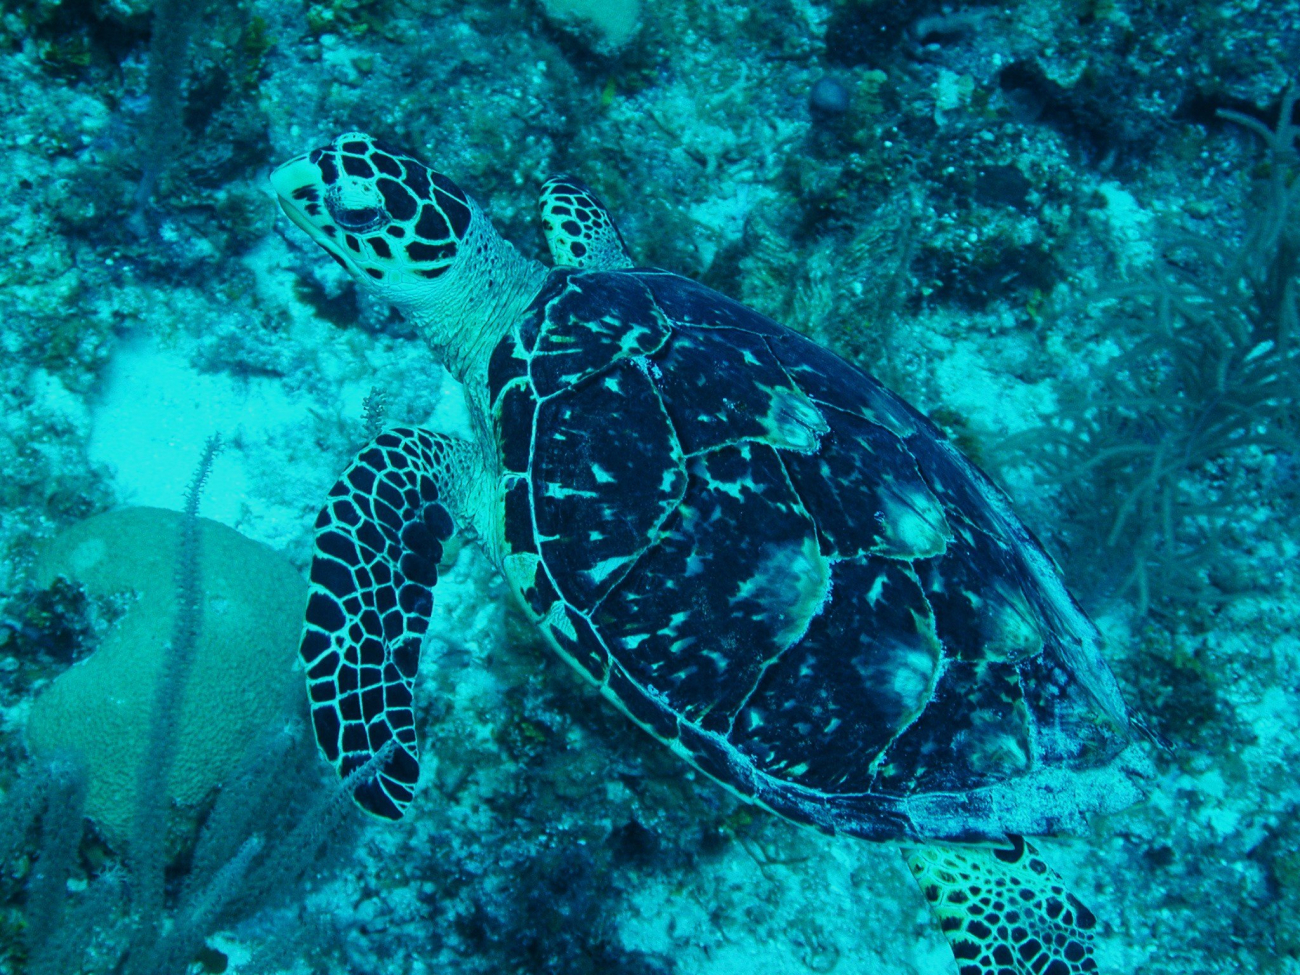 Hawksbill turtles were very interested in what divers were doing in their domain